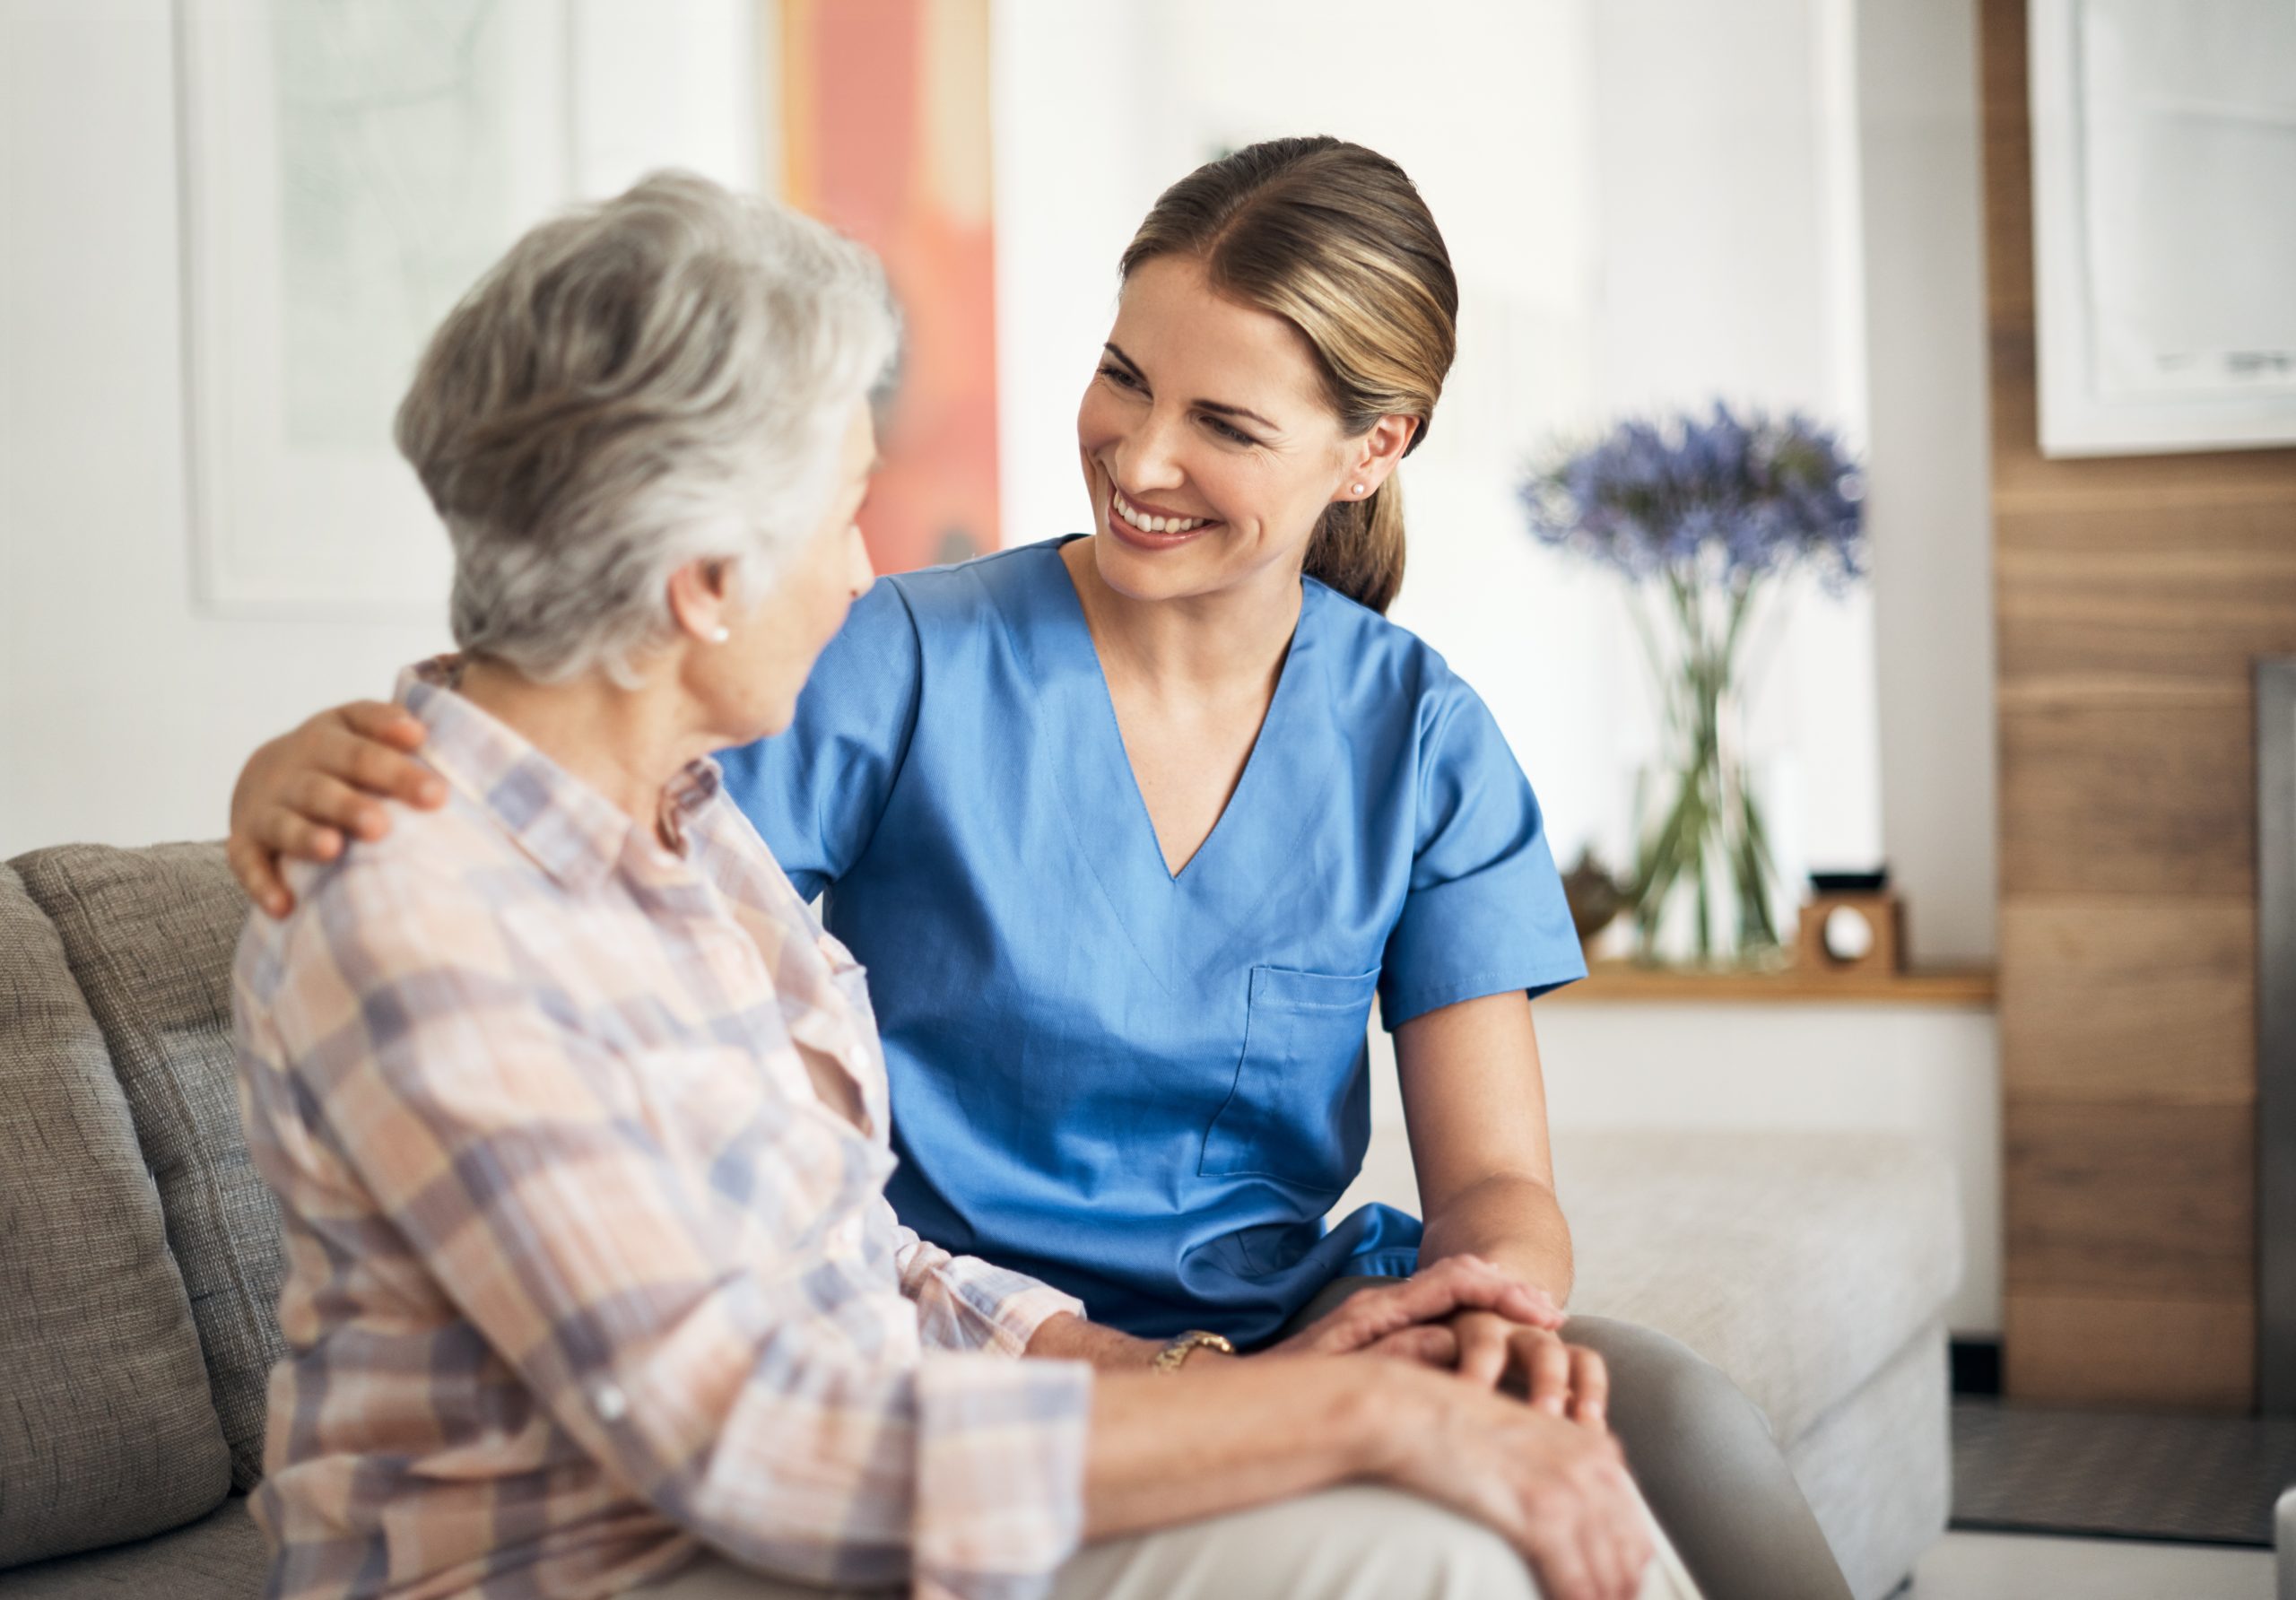 A nurse attentively sits beside an elderly woman on a couch, providing care and support.